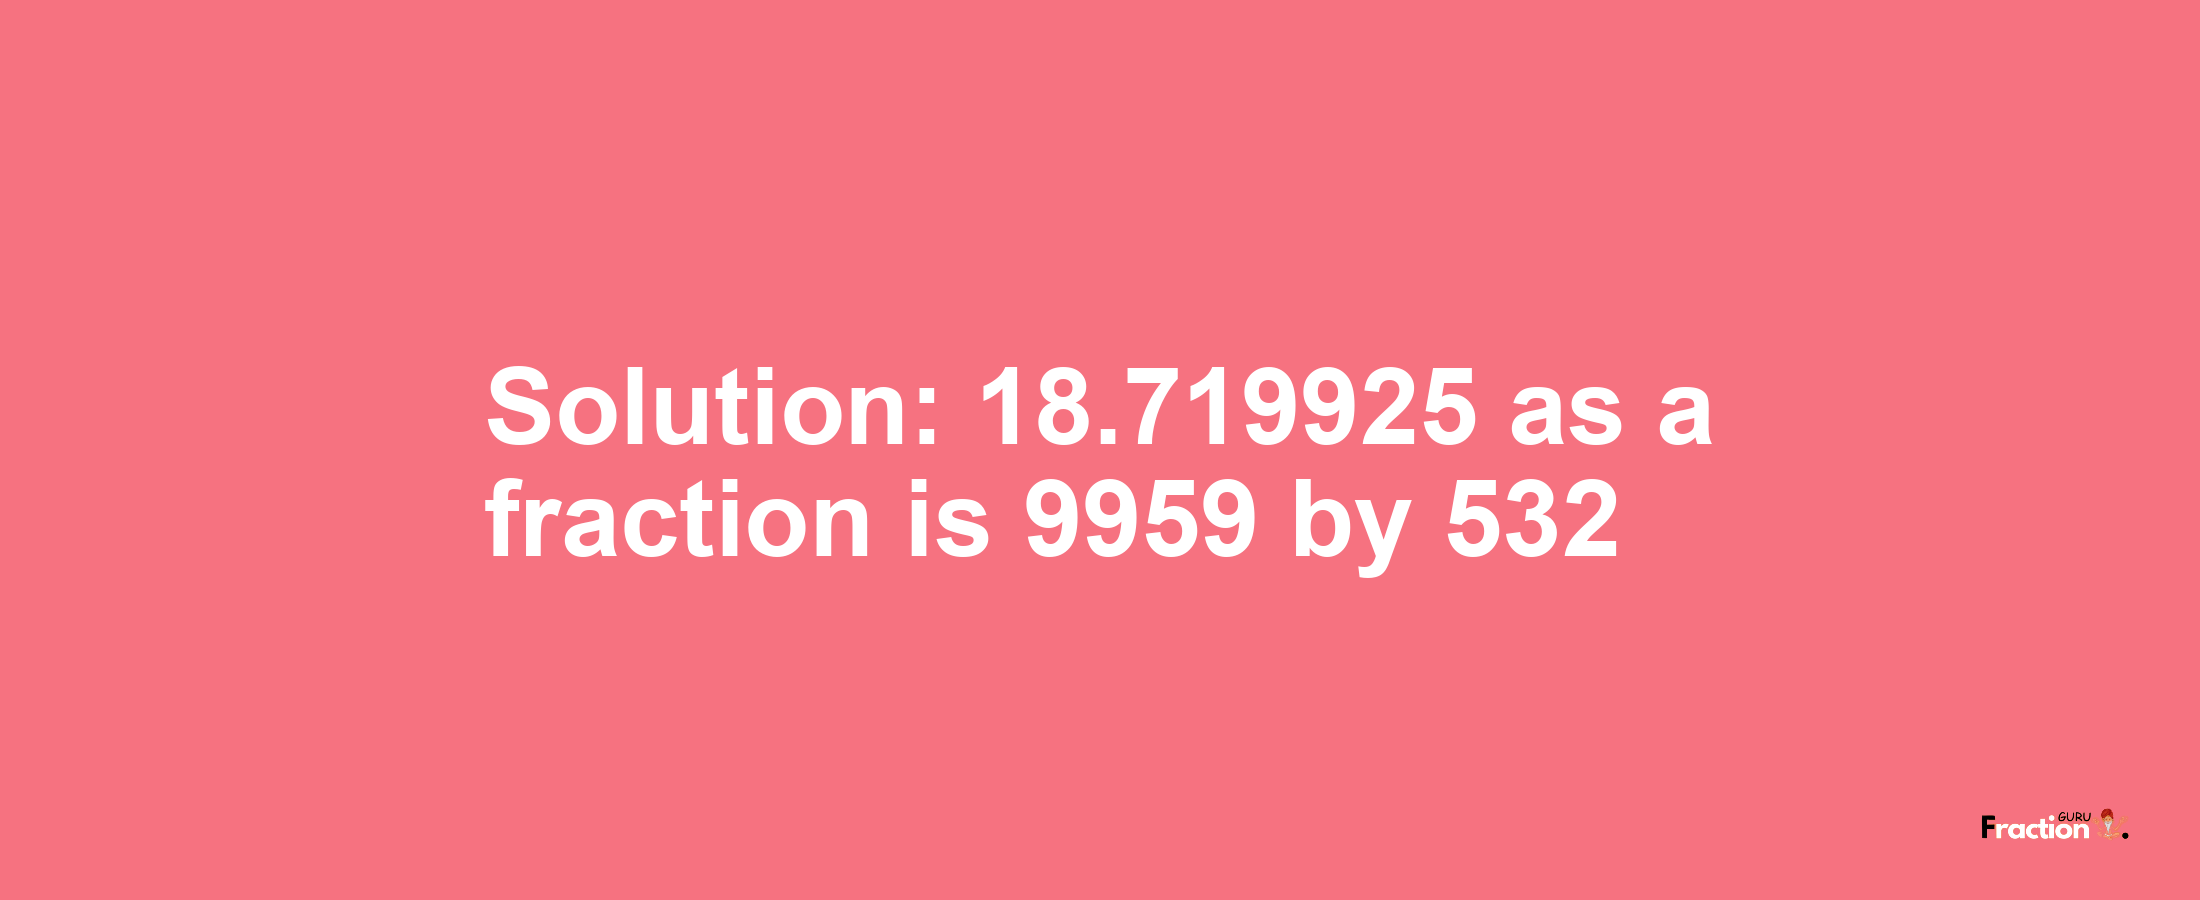 Solution:18.719925 as a fraction is 9959/532